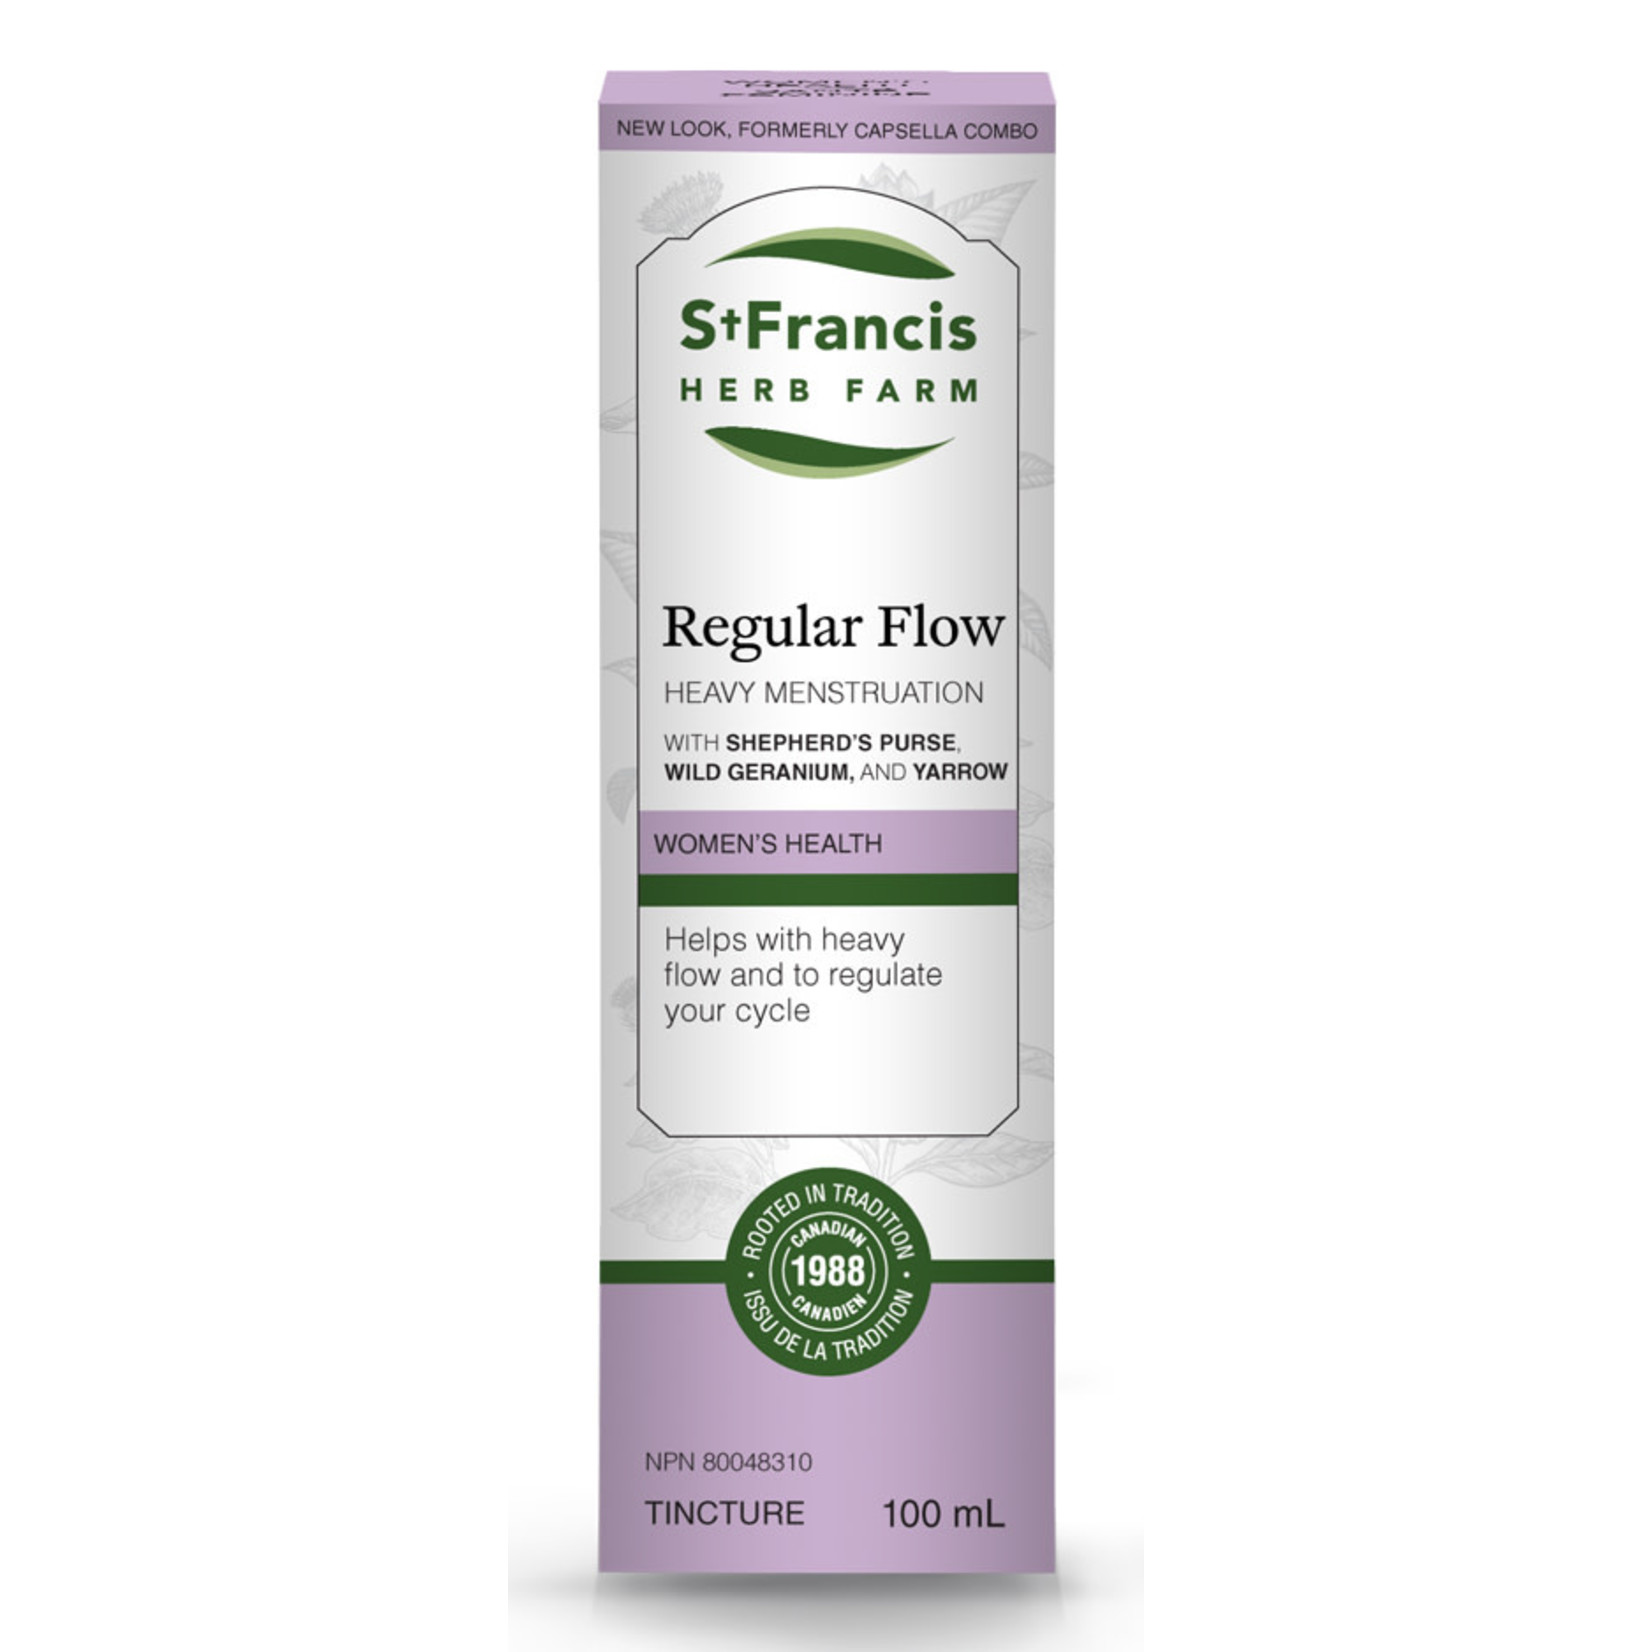 ST FRANCIS ST FRANCIS FEMANCE REGULAR FLOW TINCTURE (CAPSELLA COMBO OR EXCESS) 100ML